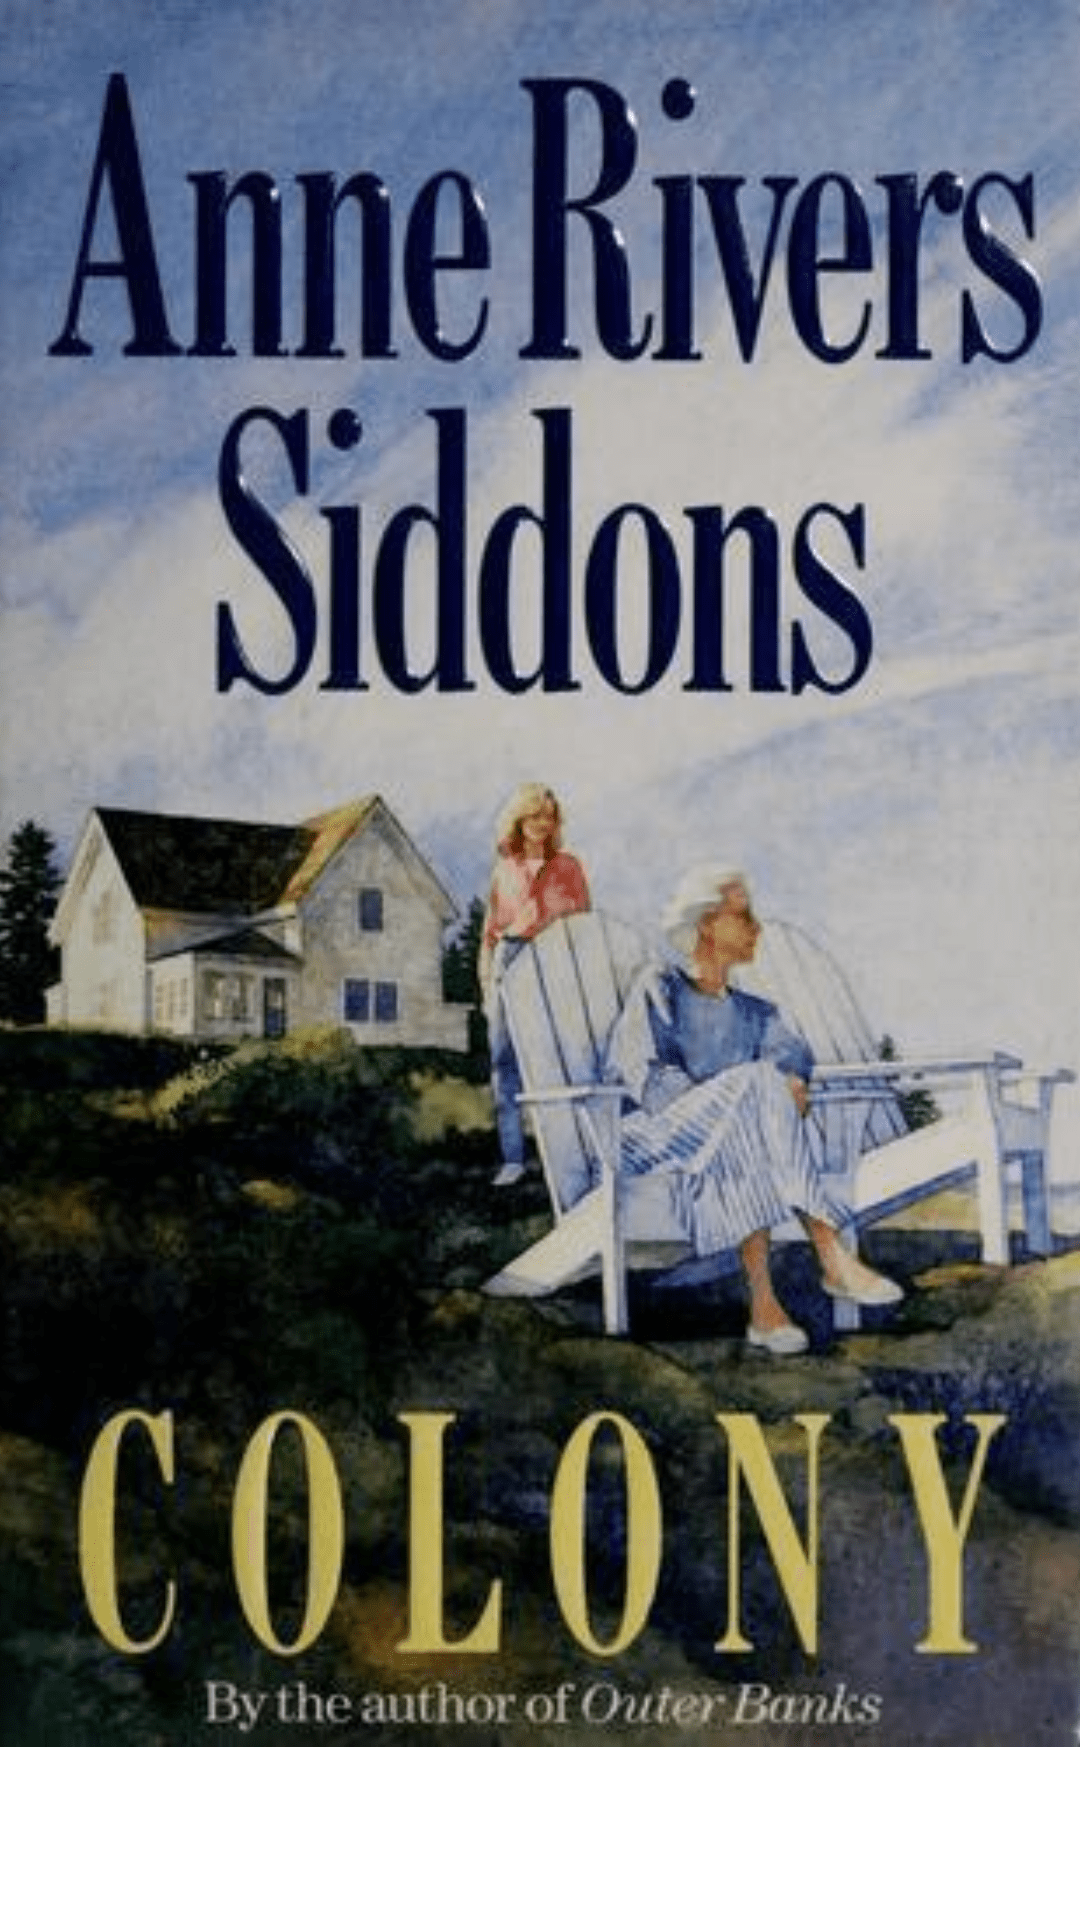 Colony by Anne Rivers Siddons